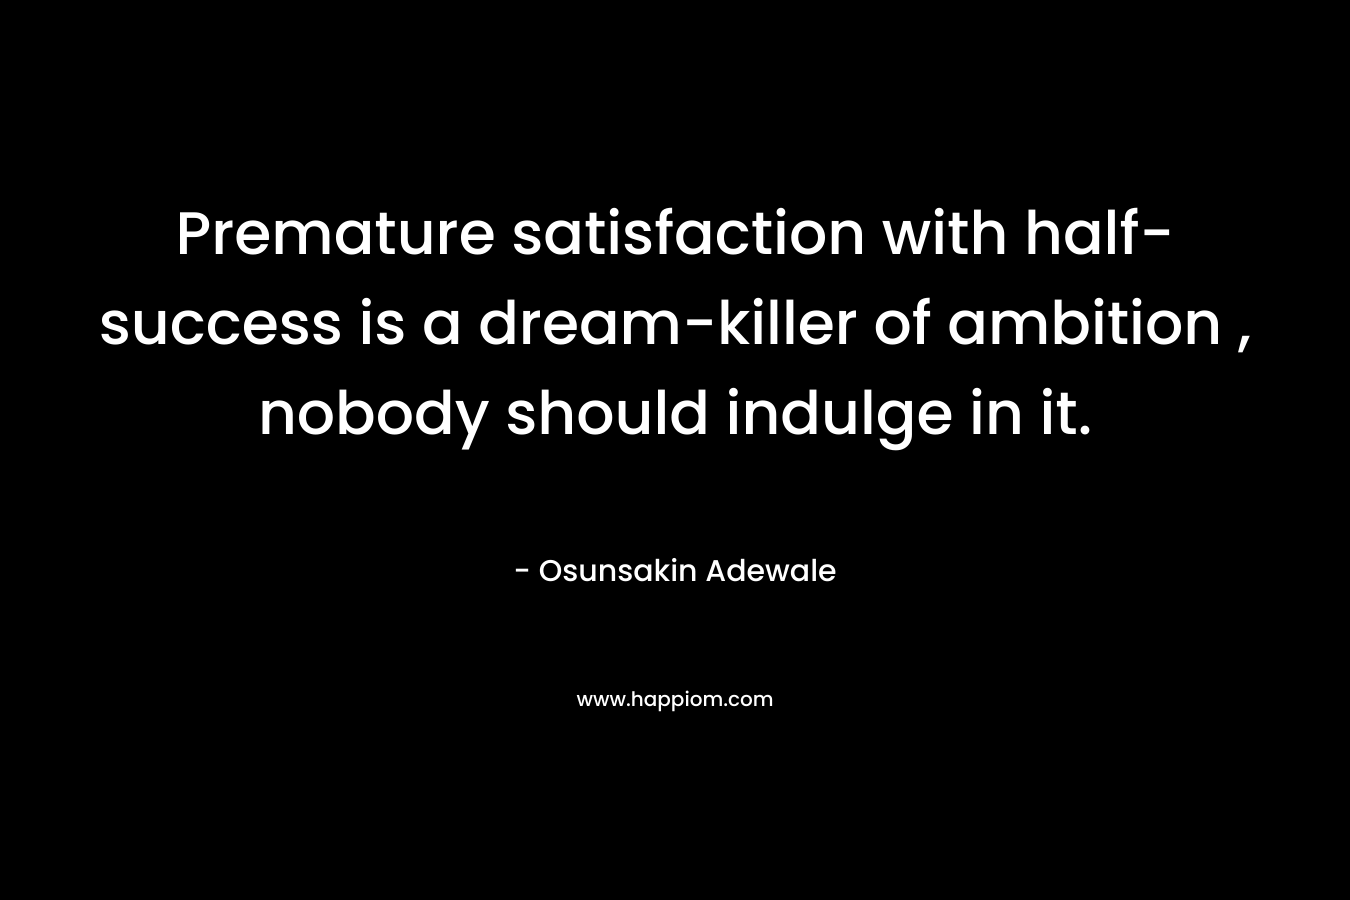 Premature satisfaction with half-success is a dream-killer of ambition , nobody should indulge in it. – Osunsakin Adewale